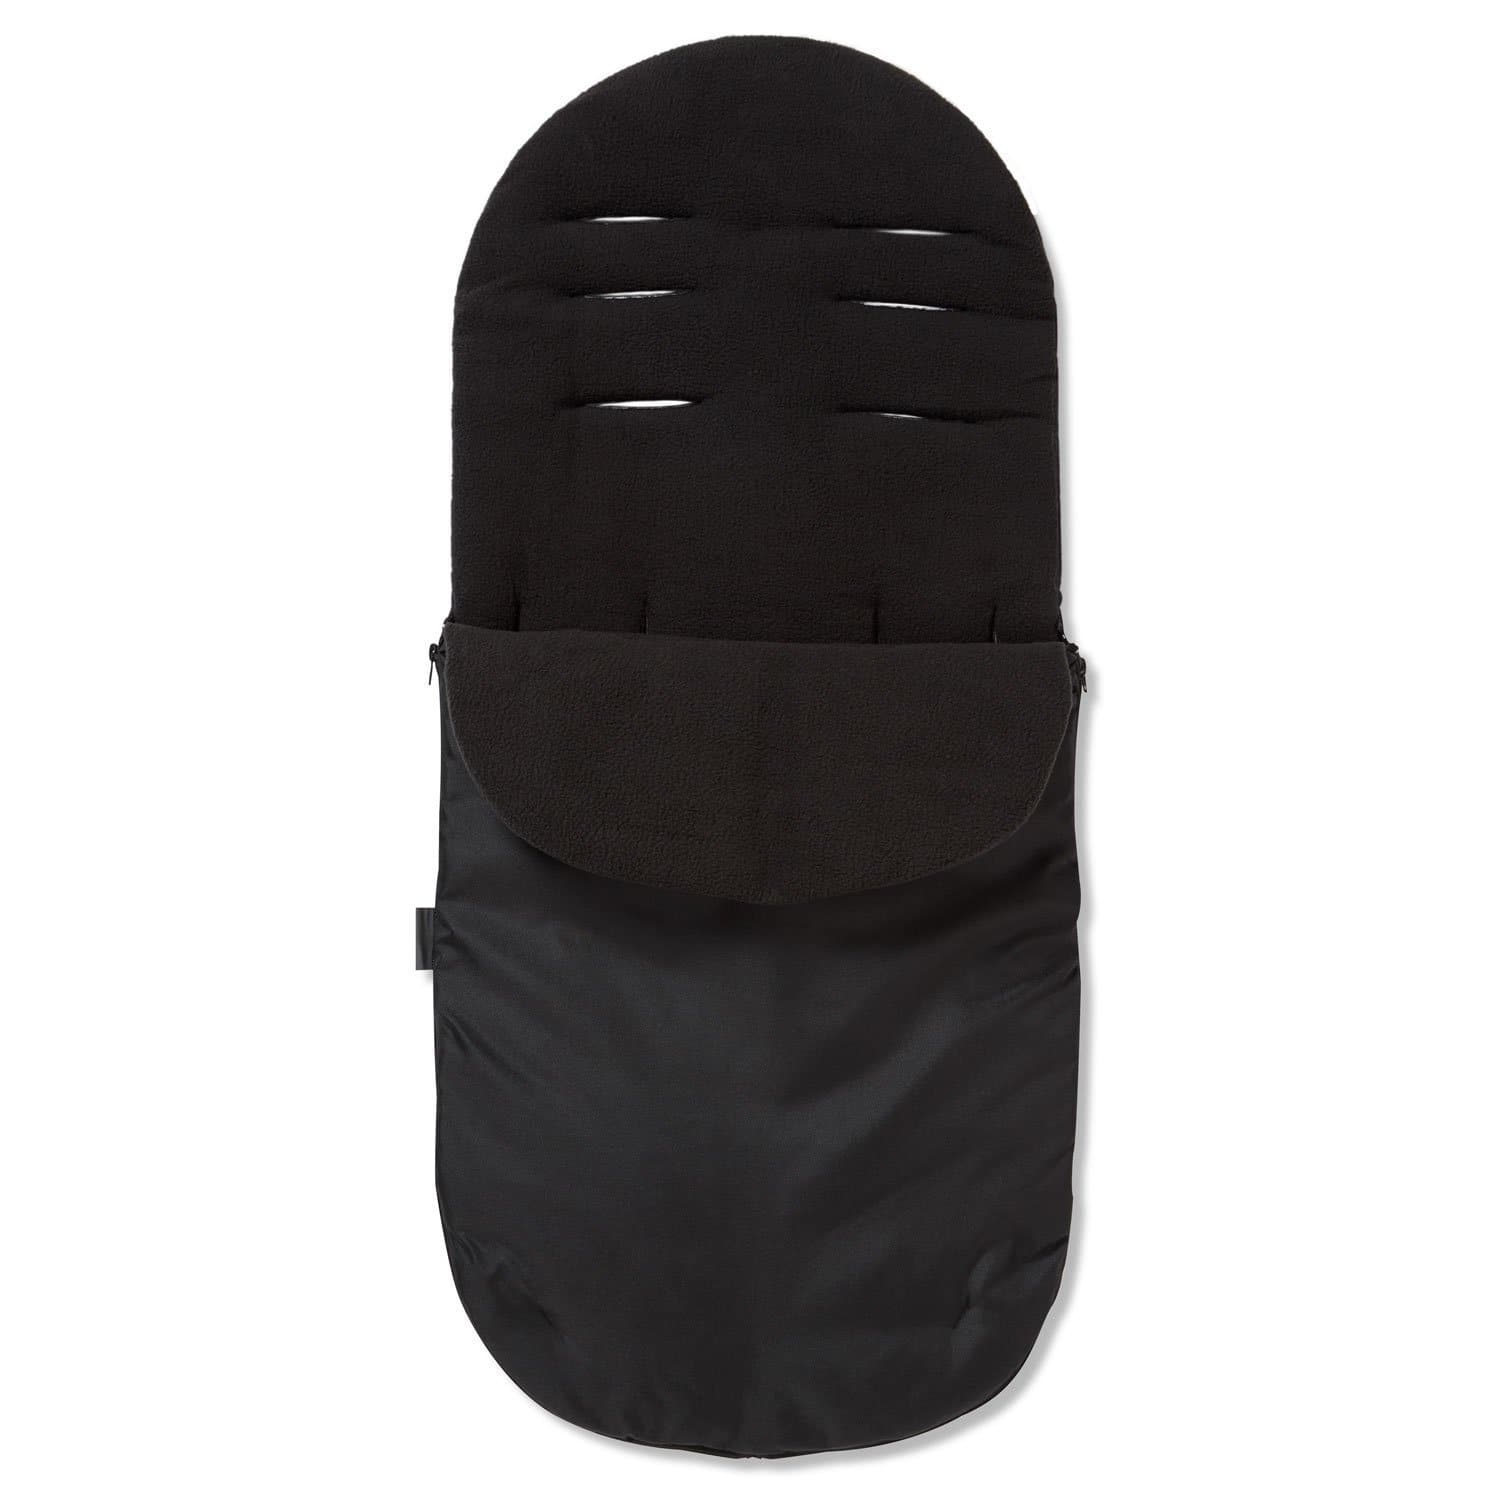 Footmuff / Cosy Toes Compatible with Hartan - Black / Fits All Models | For Your Little One